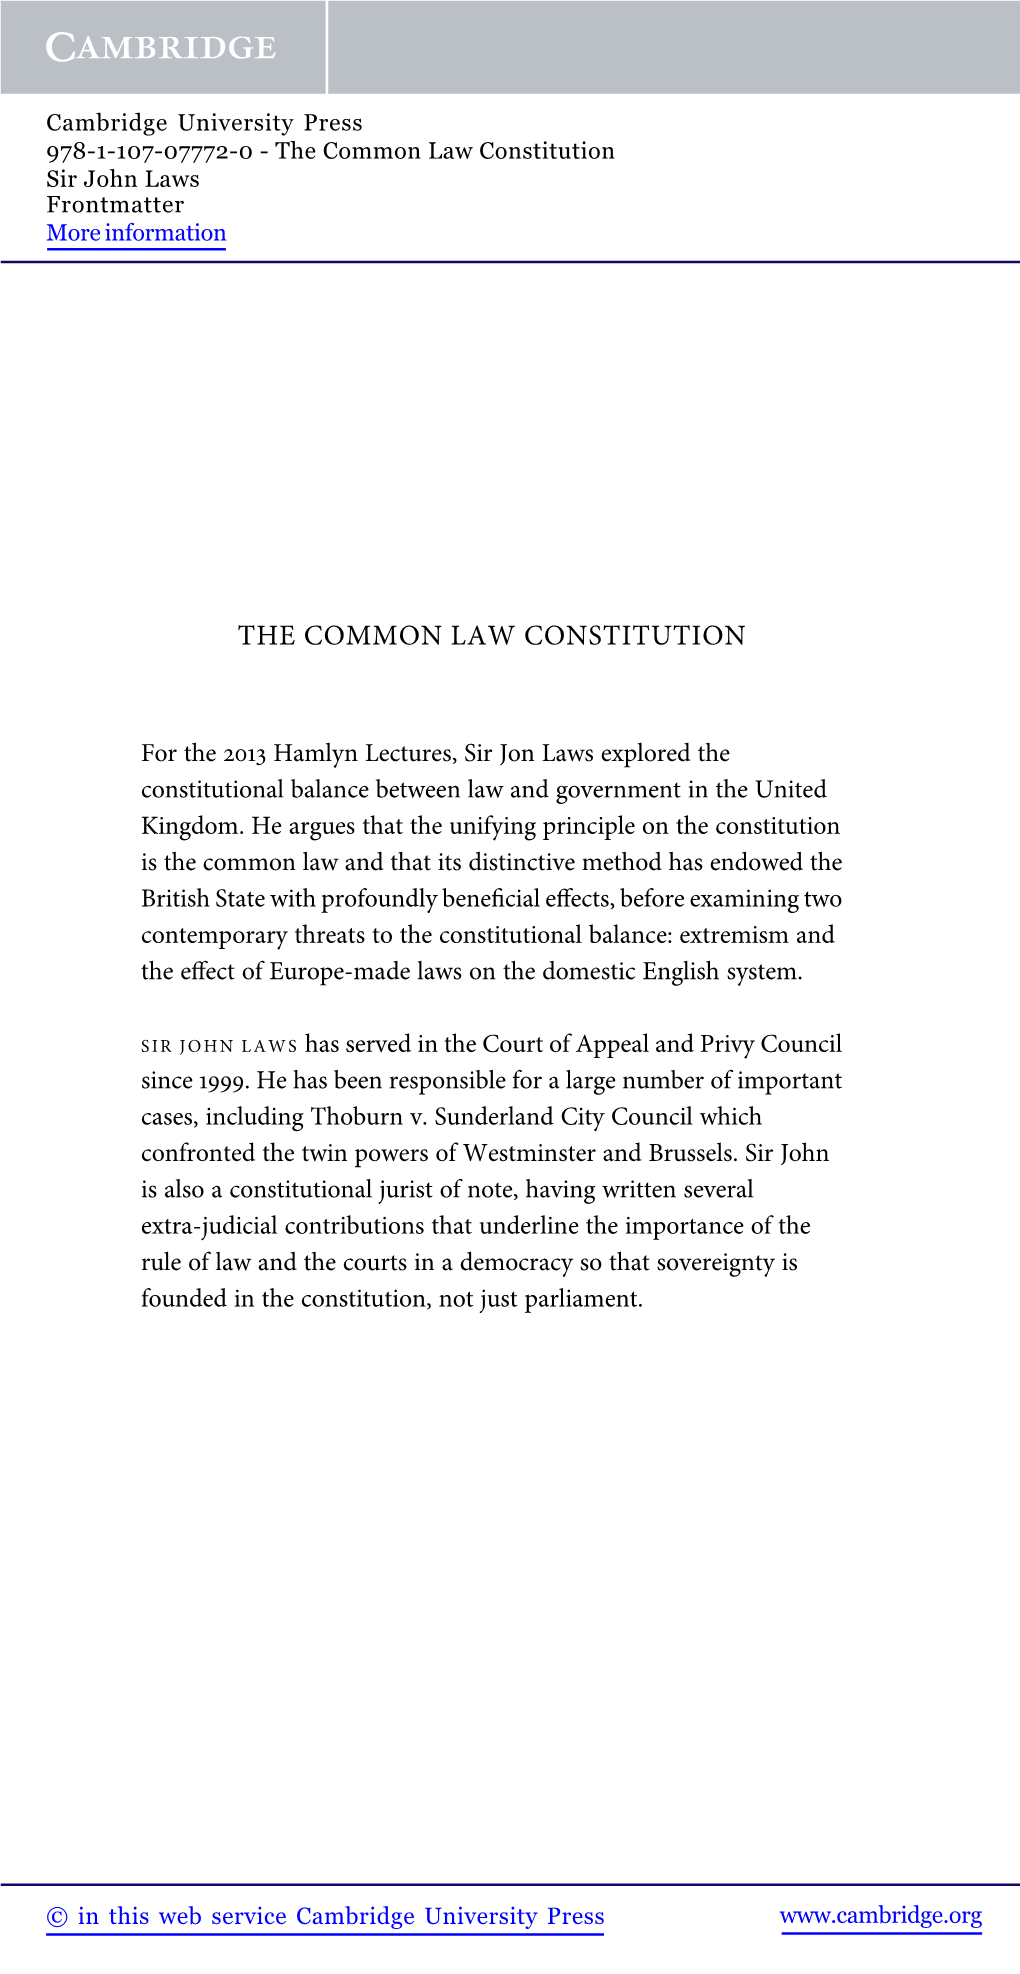 The Common Law Constitution Sir John Laws Frontmatter More Information